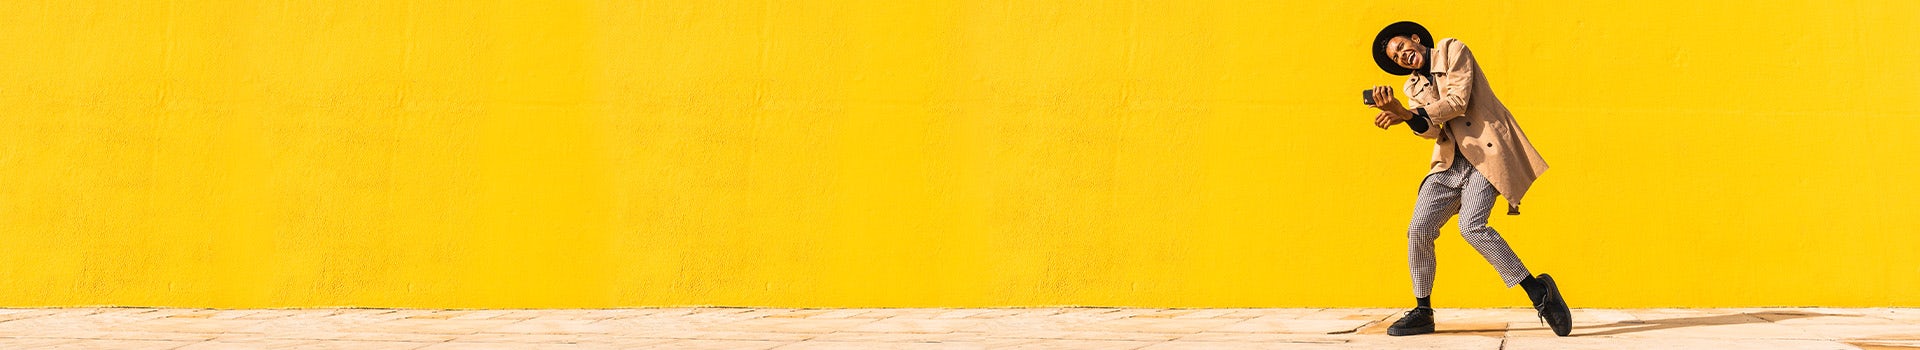 young-man-dancing-in-front-of-yellow-wall-getty-1292965830-hero